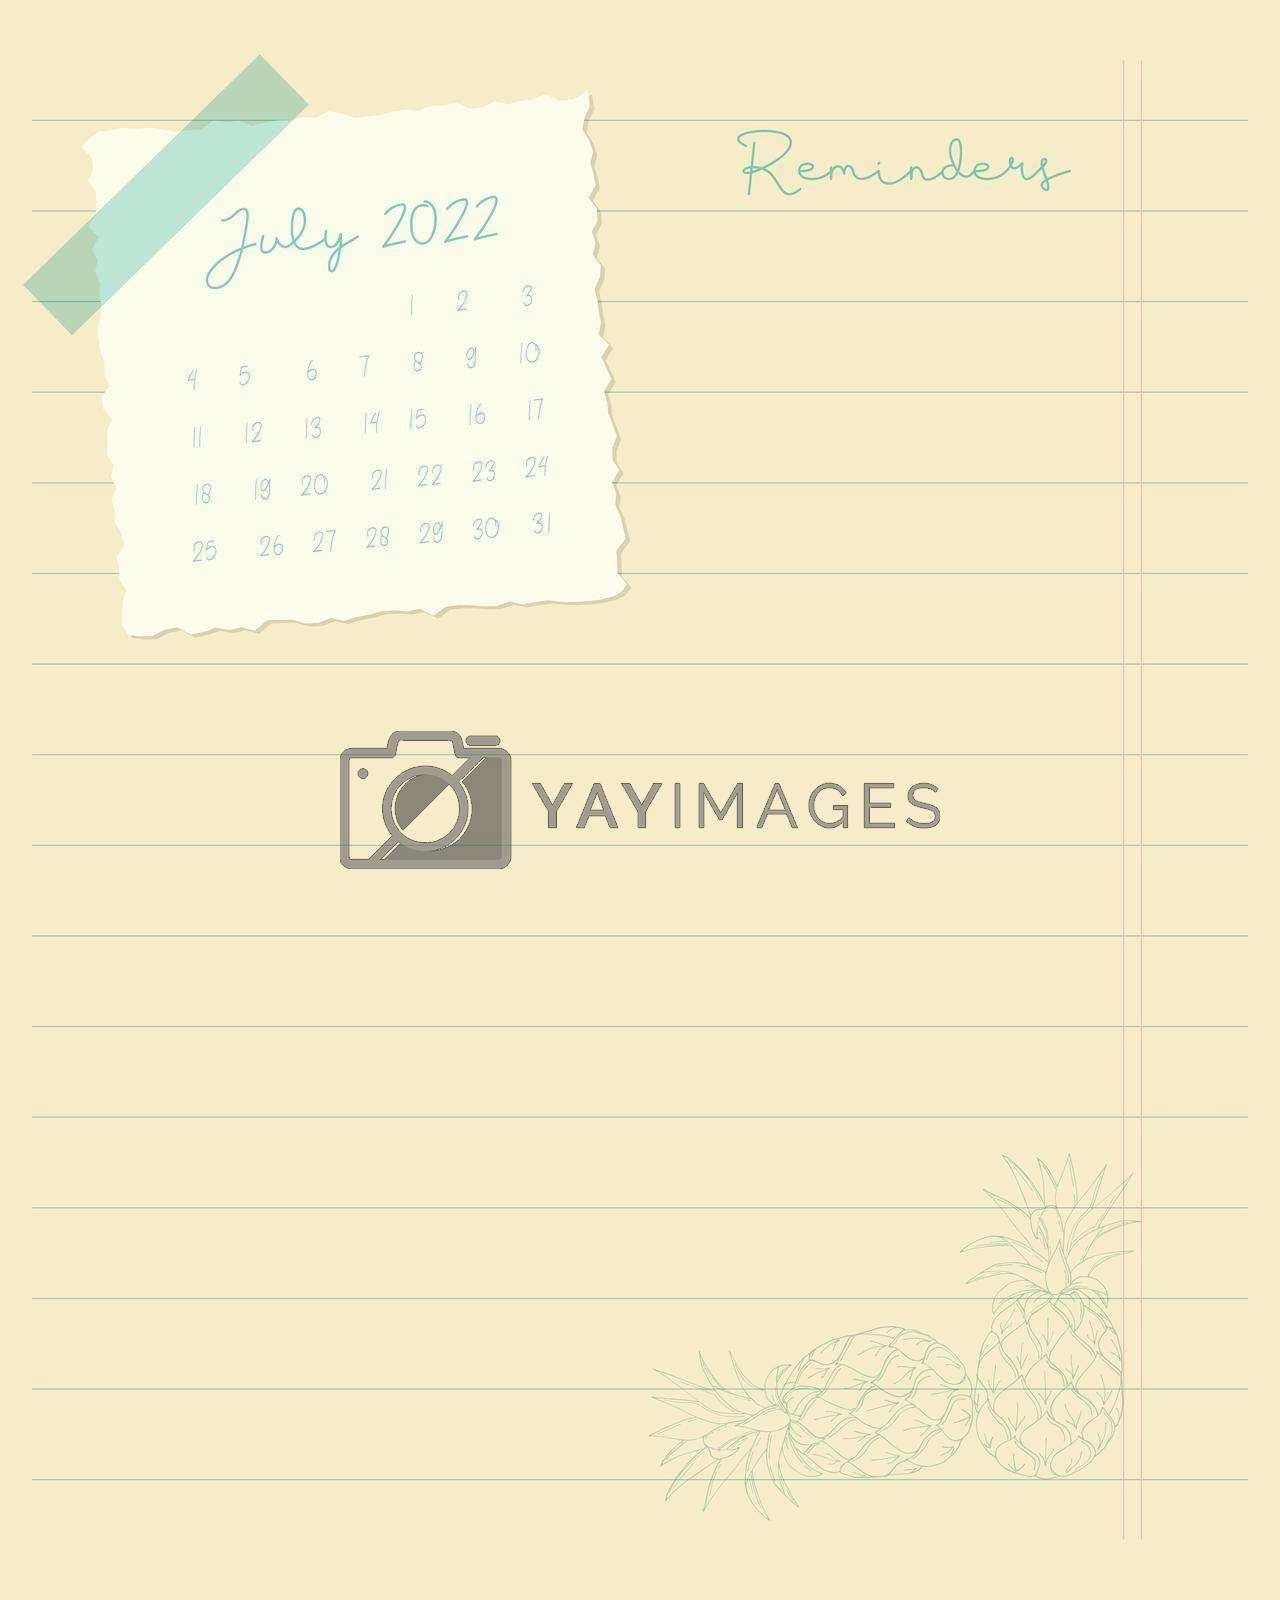 Royalty free image of Calendar July 2022 Reminders ,To do list , planner note-taking ,scrapbooking,pineapple and lined notebook sheet , ideas, plans. by Margo